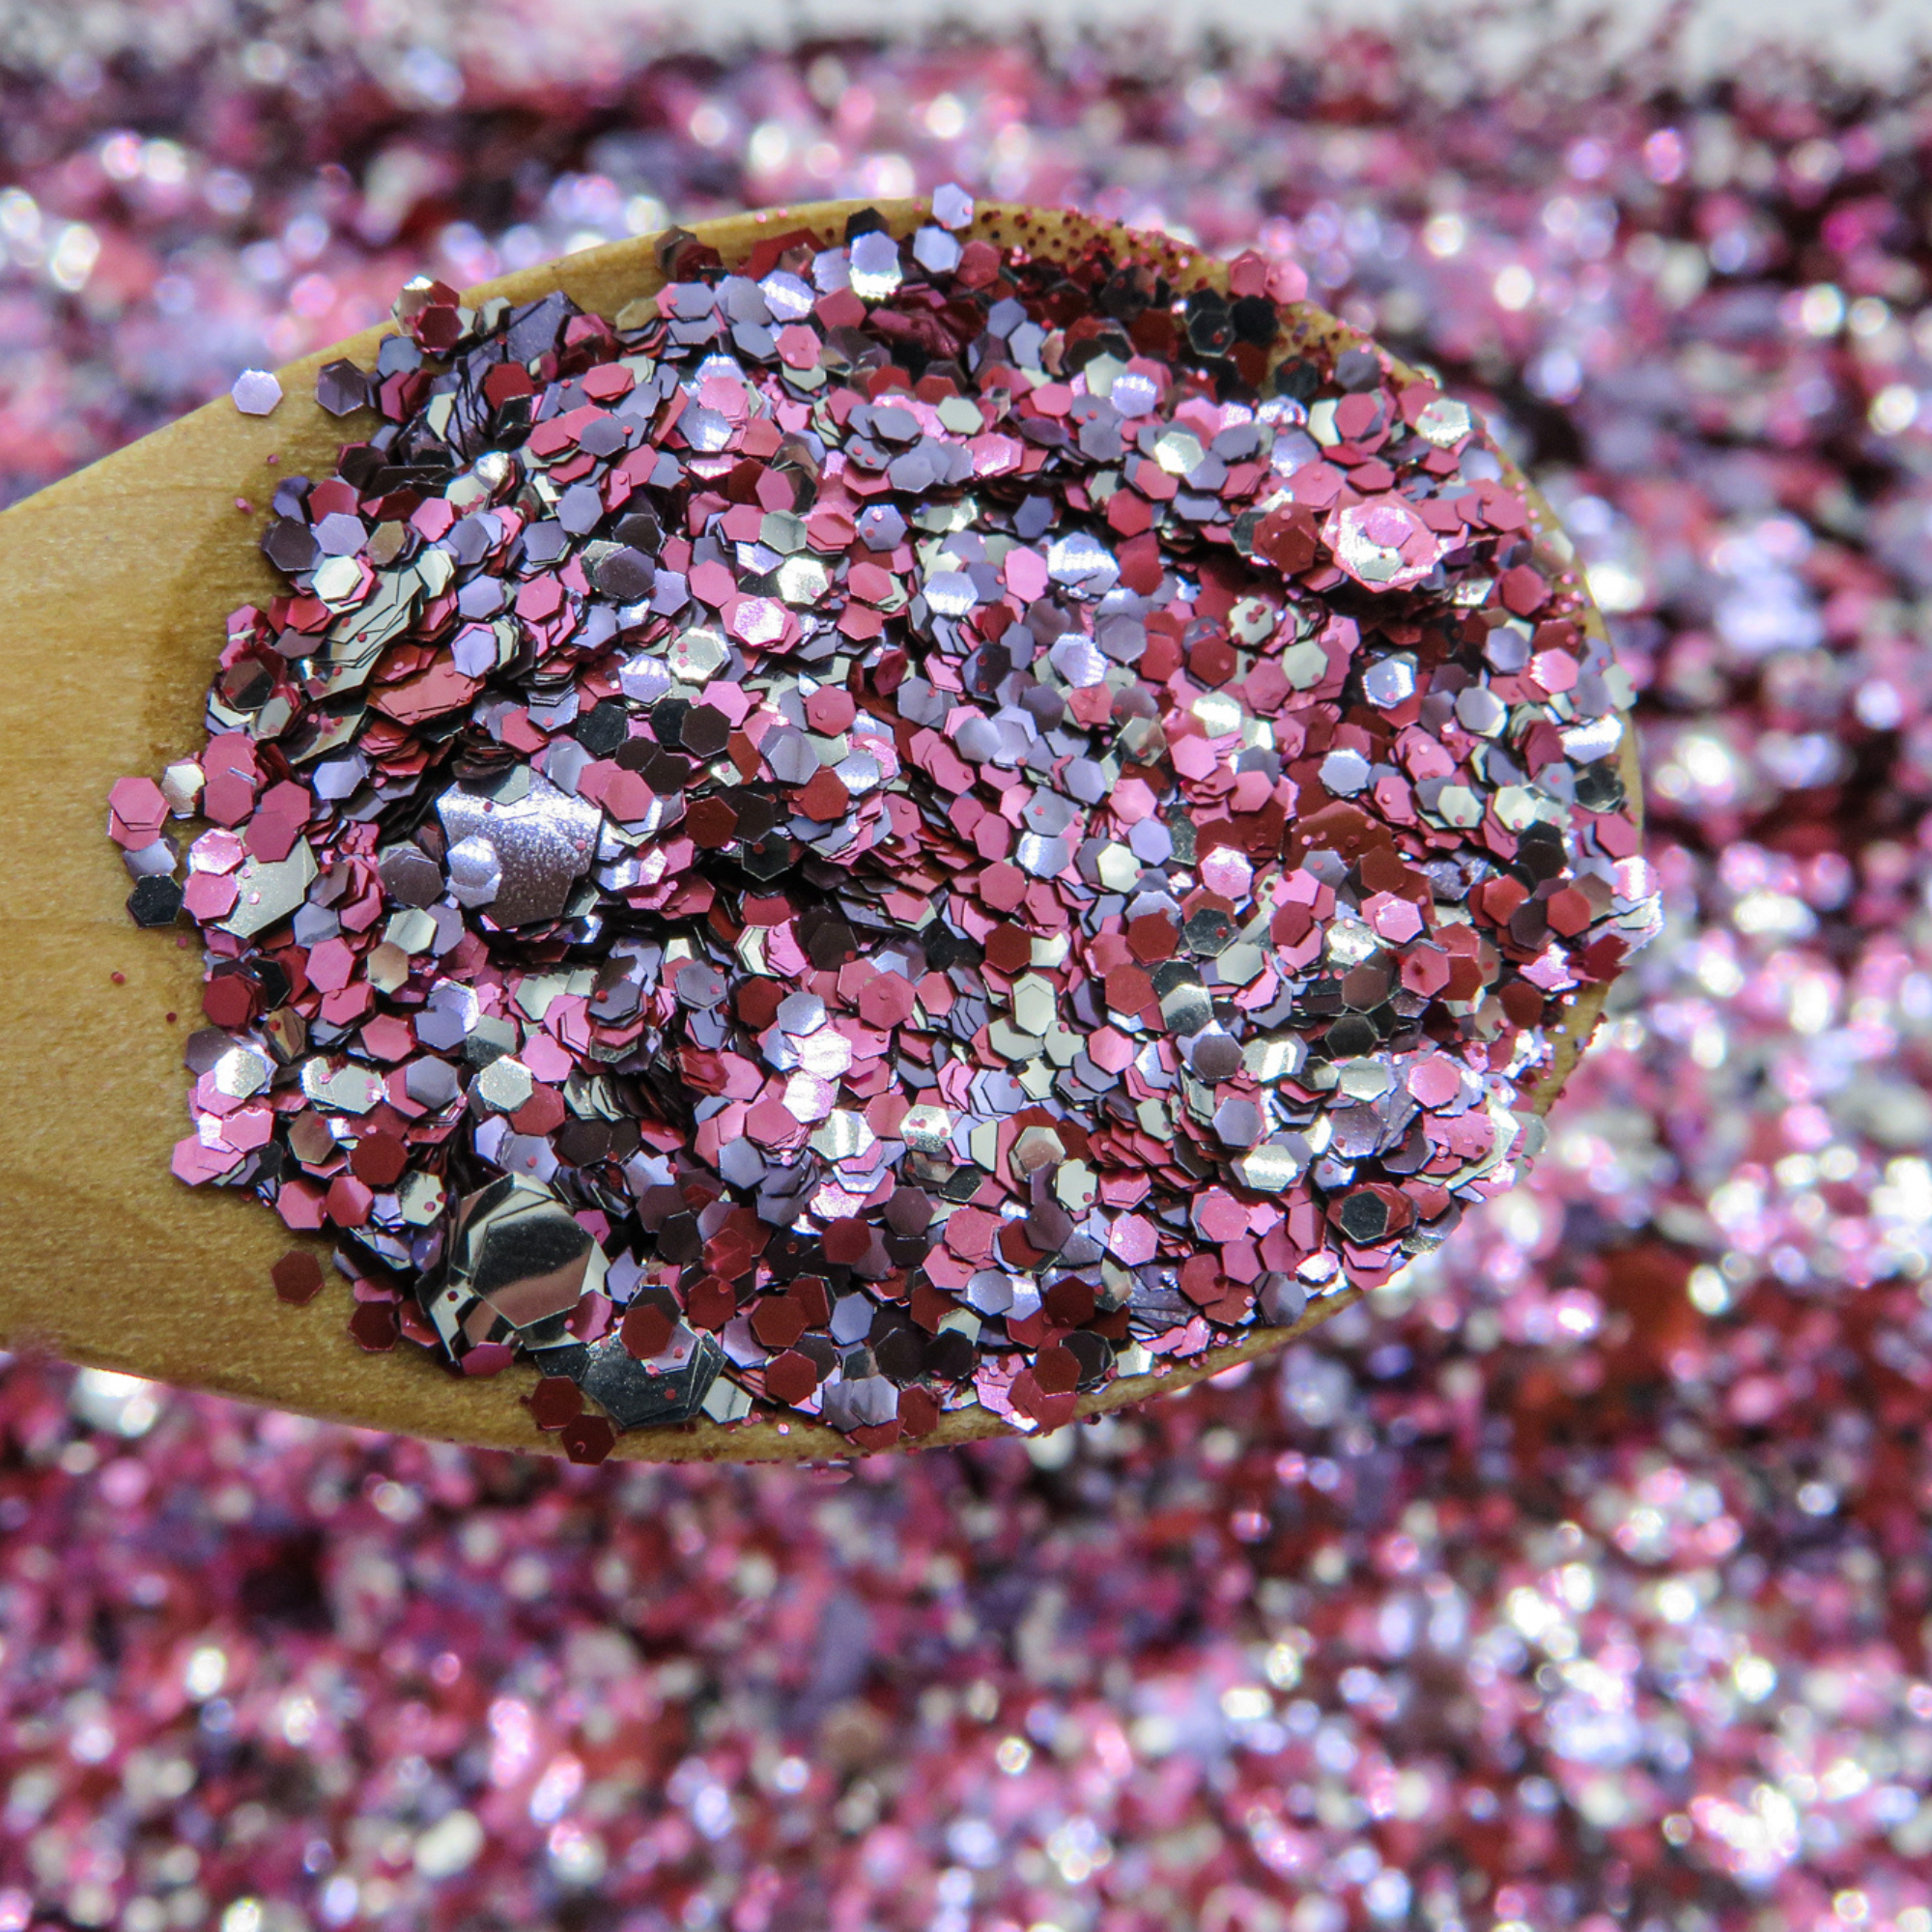 sweetheart eco glitter blend made of pink, silver and purple biodegradable glitter